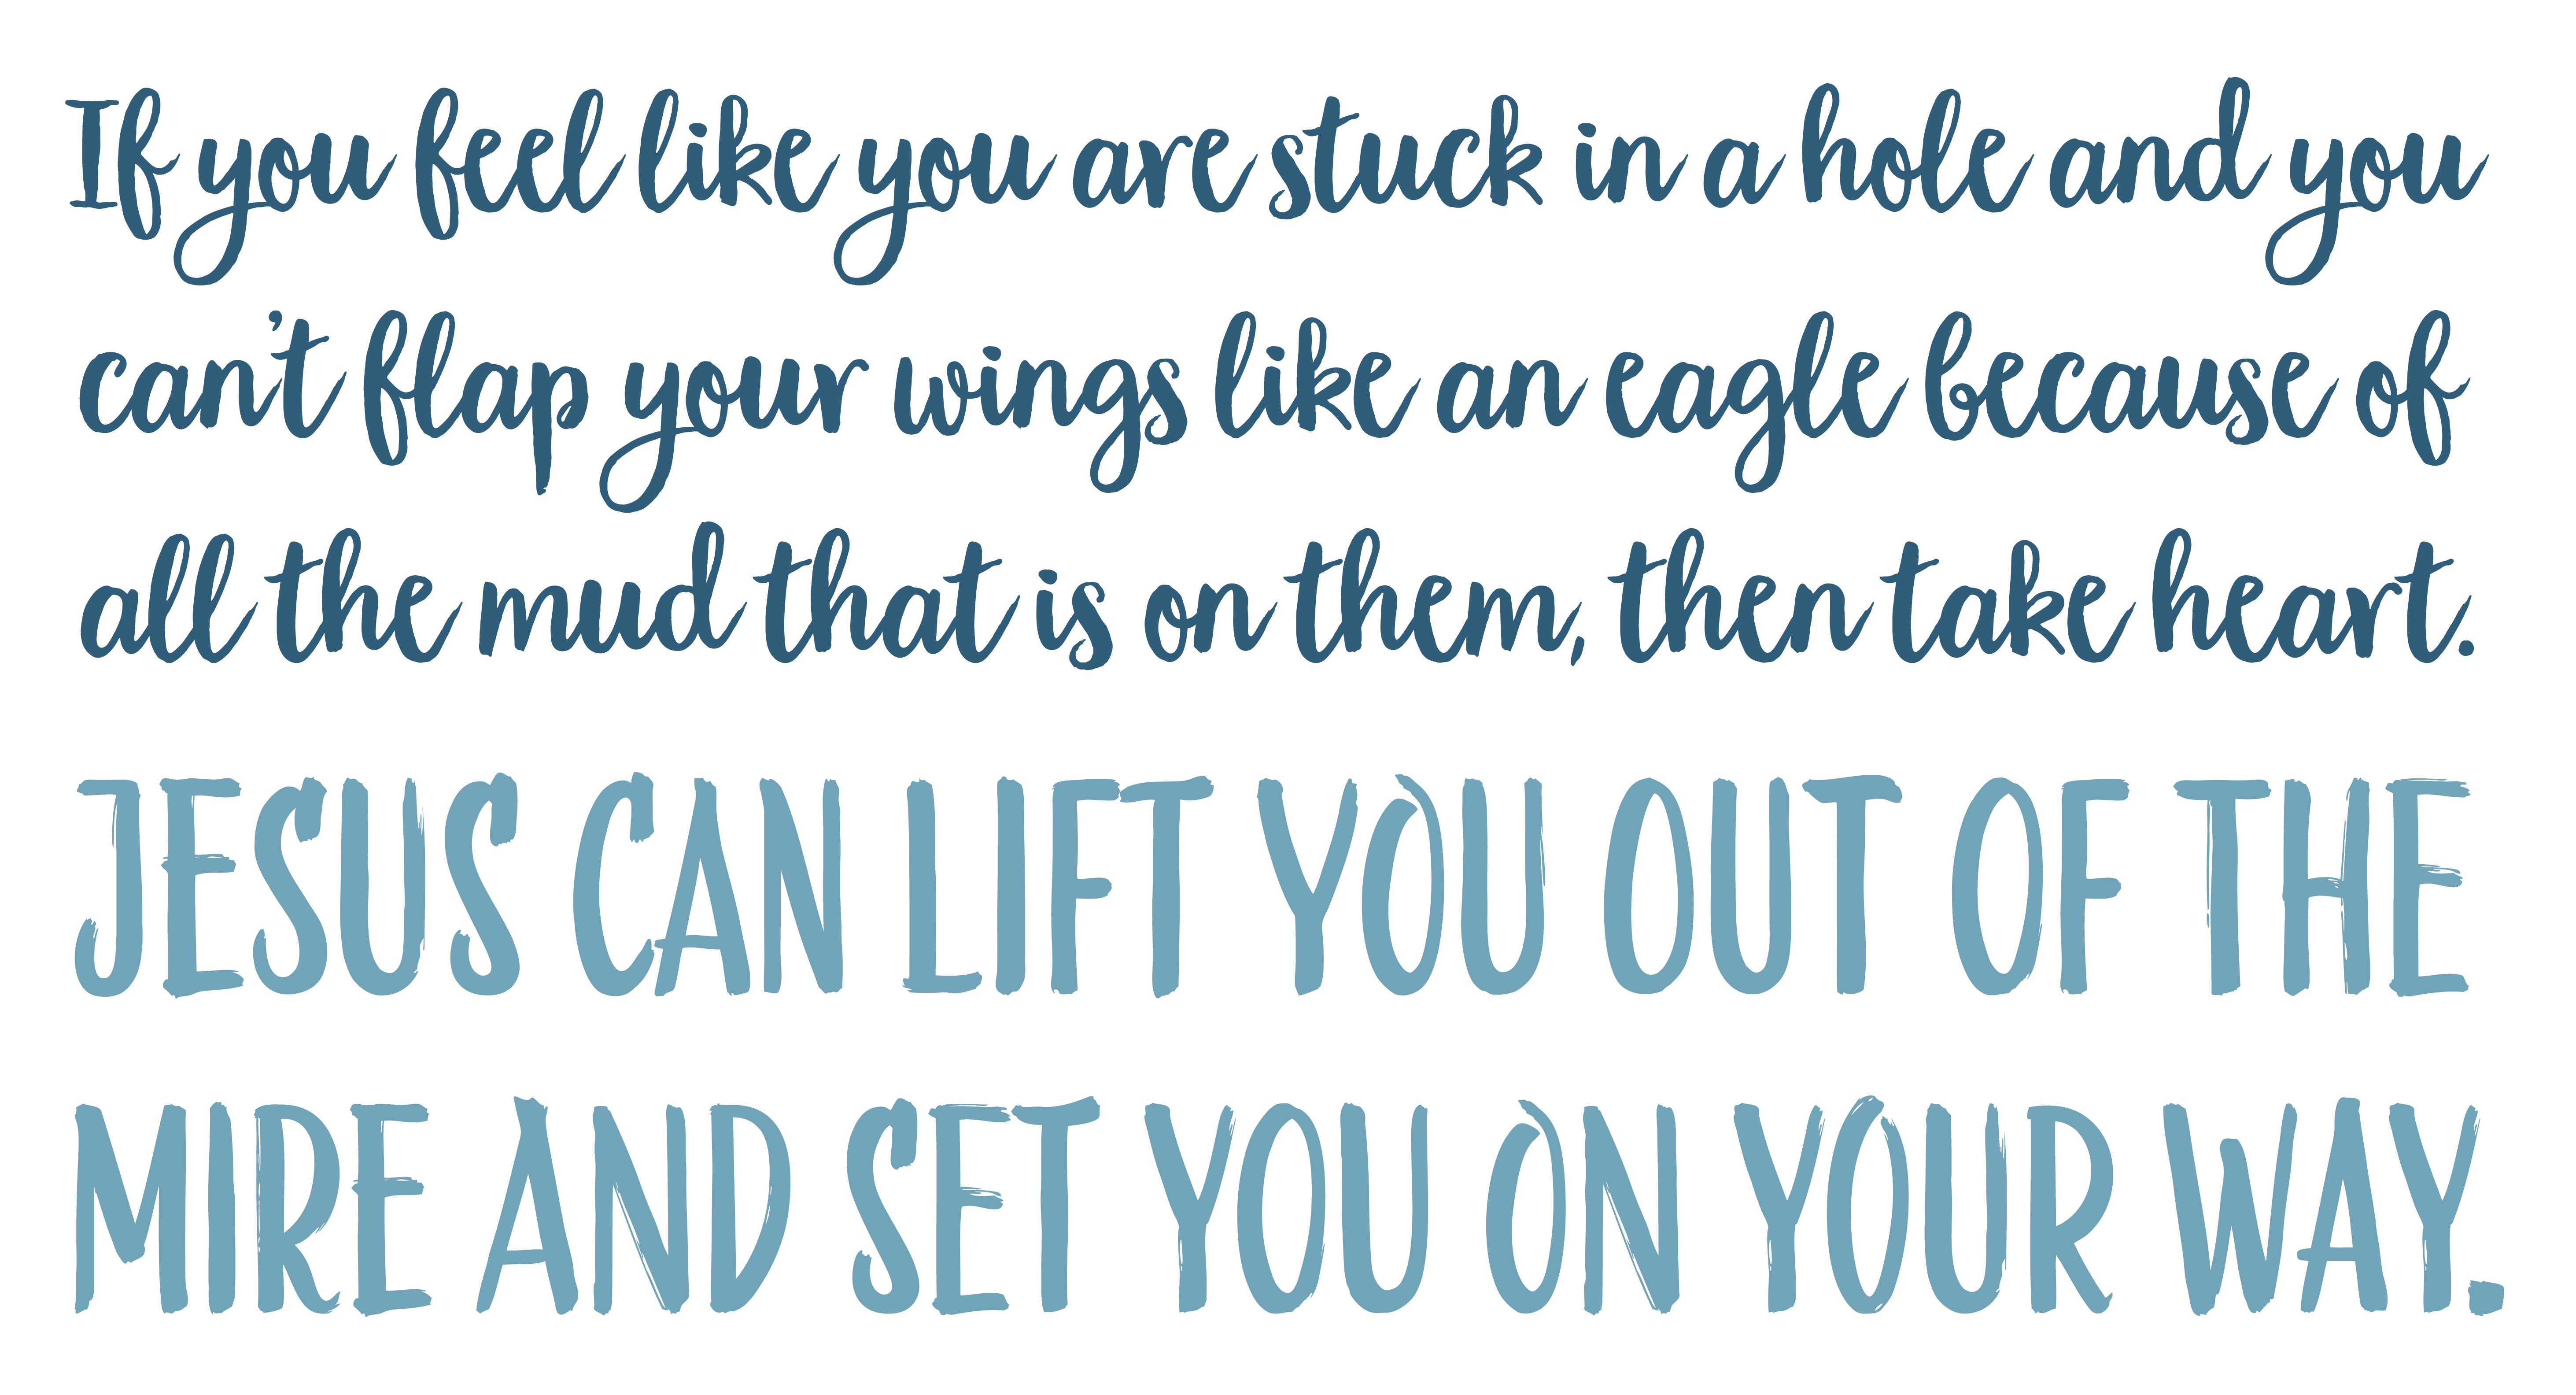 Typographic treatment of pull quote: "If you feel like you are stuck in a hole and you can't flap your wings like an eagle because of all the mud that is on them, then take hear. Jesus can lift you out of the mire and set you on your way.